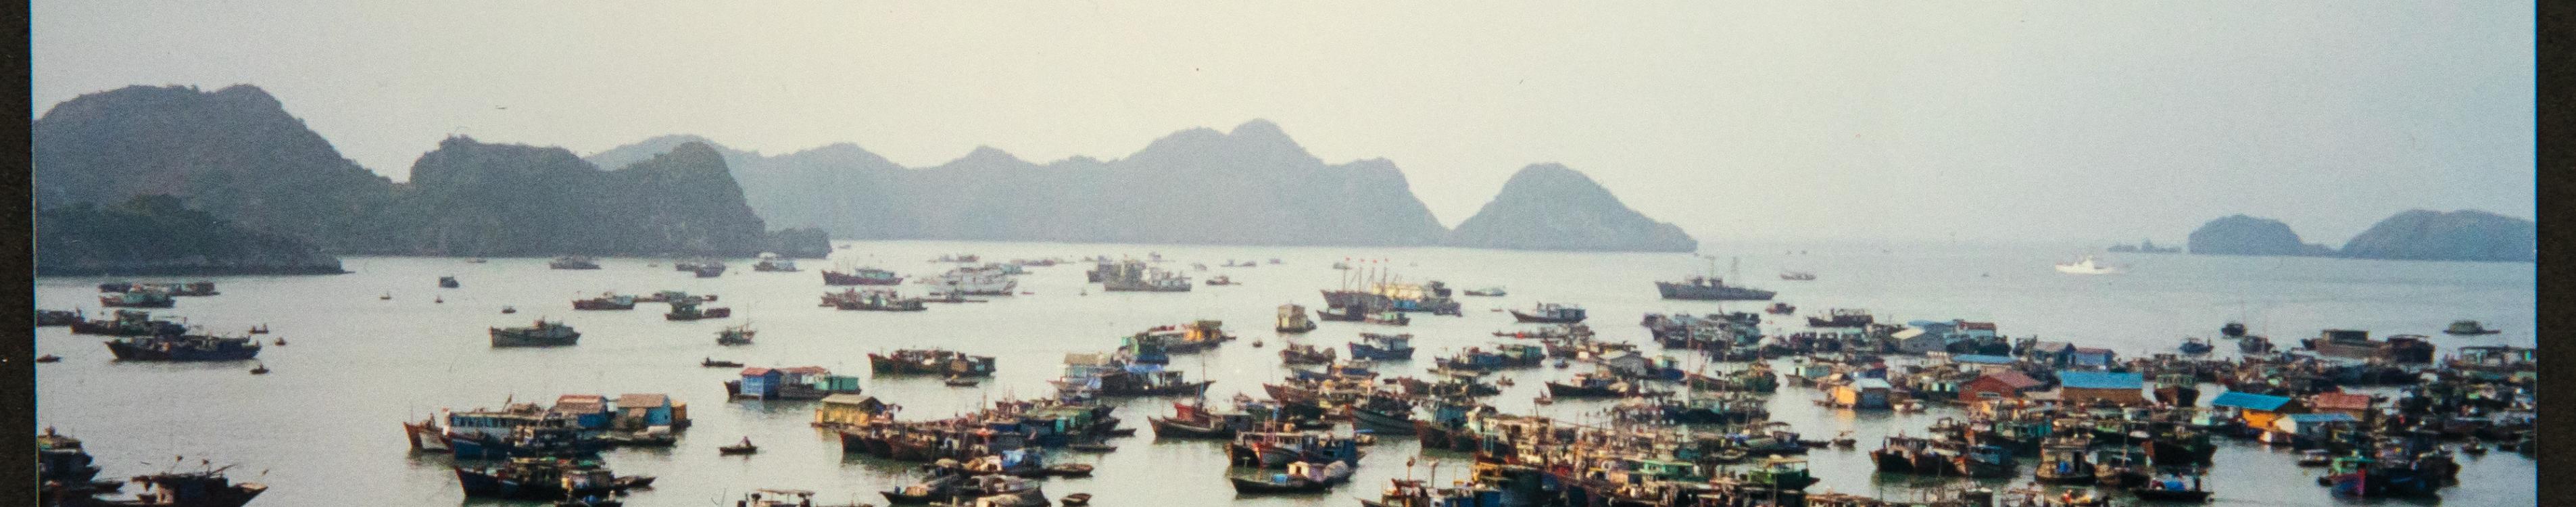 Small fishing boats anchored in harbor